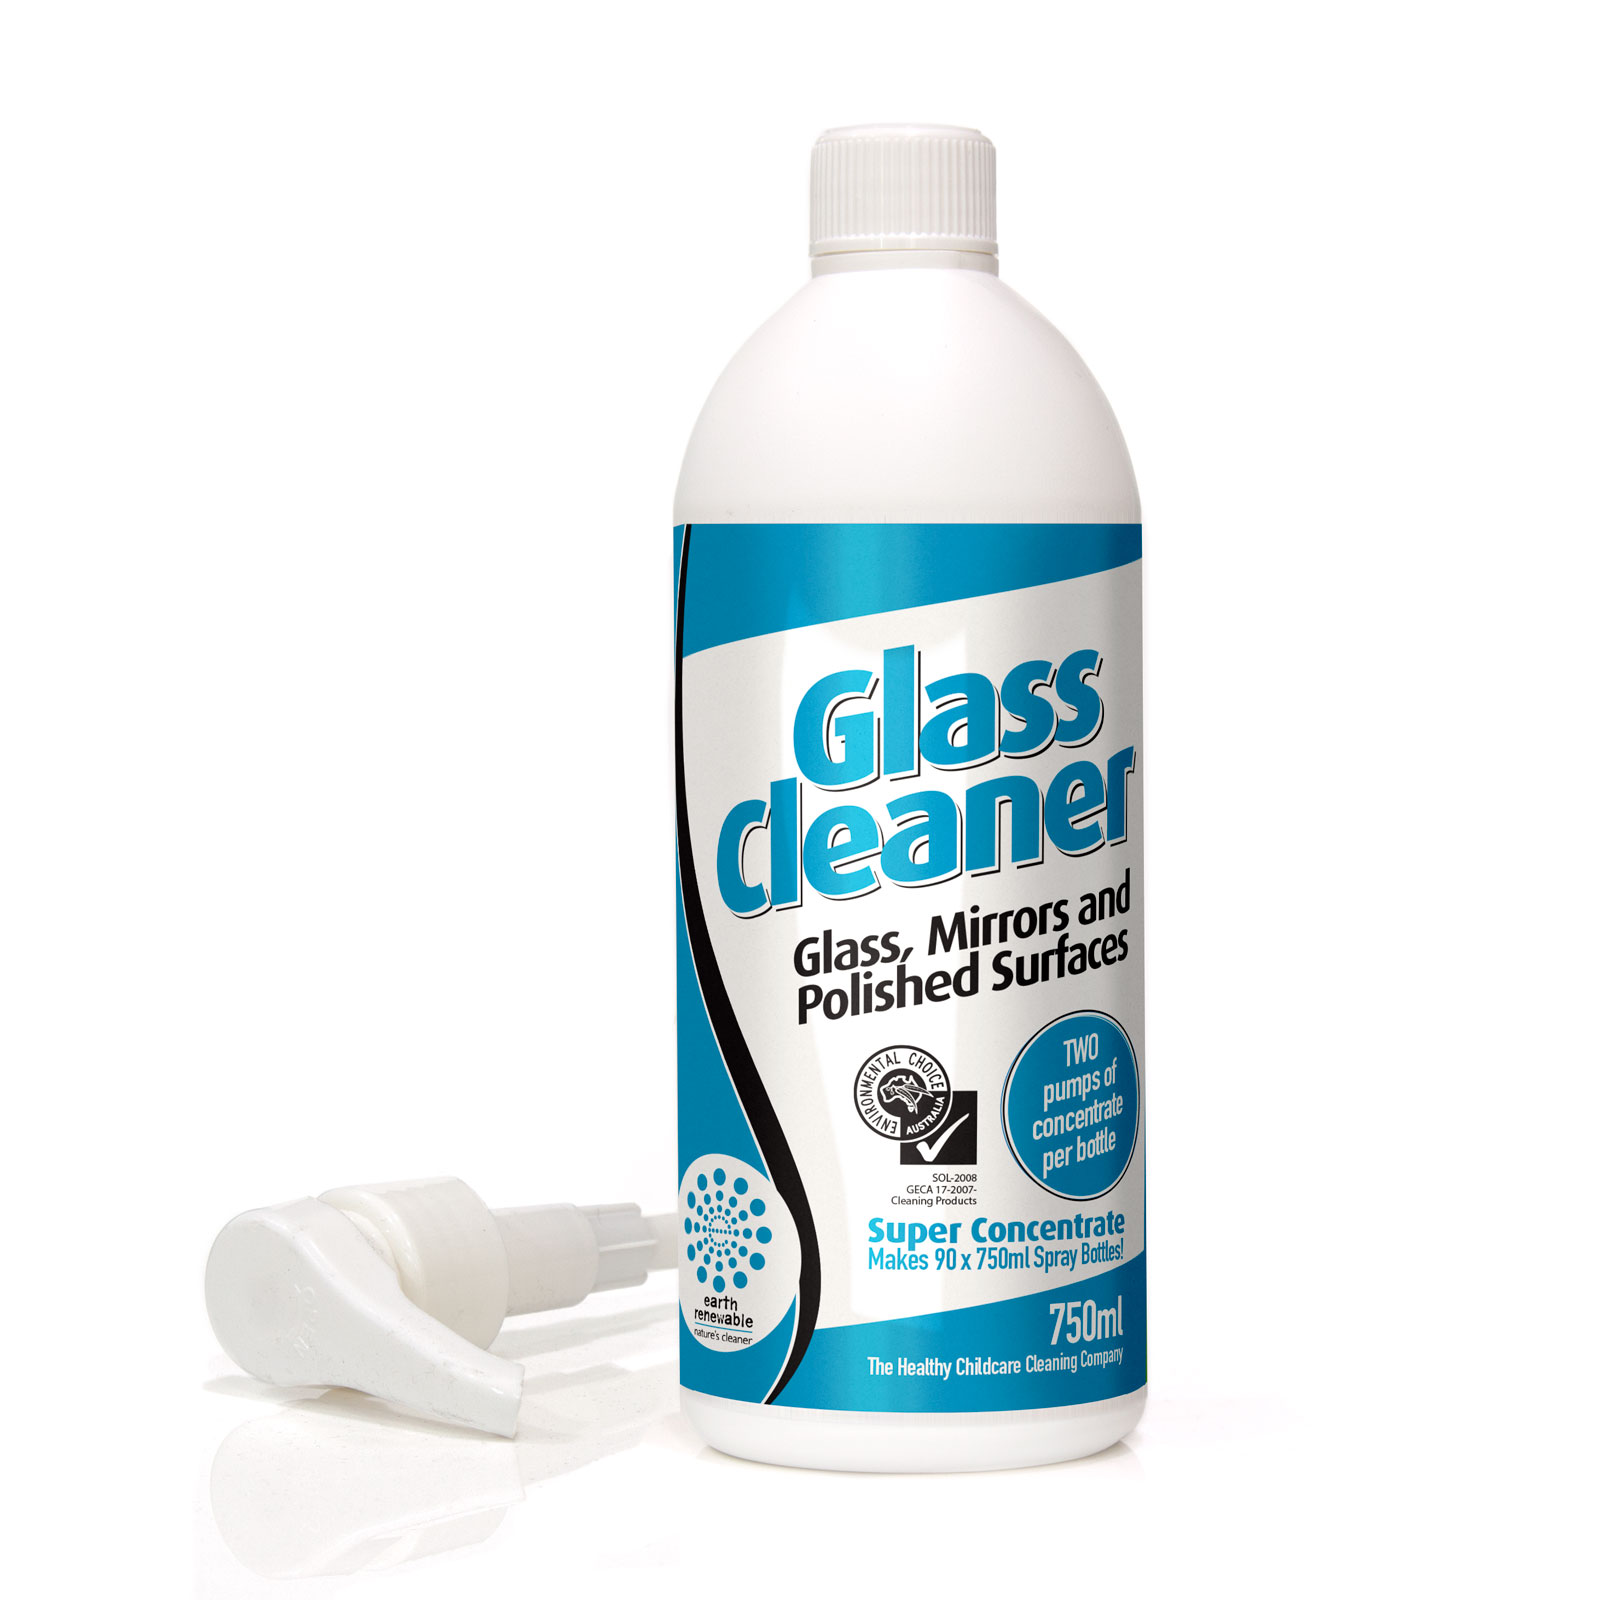 Earth Renewable Glass Cleaner